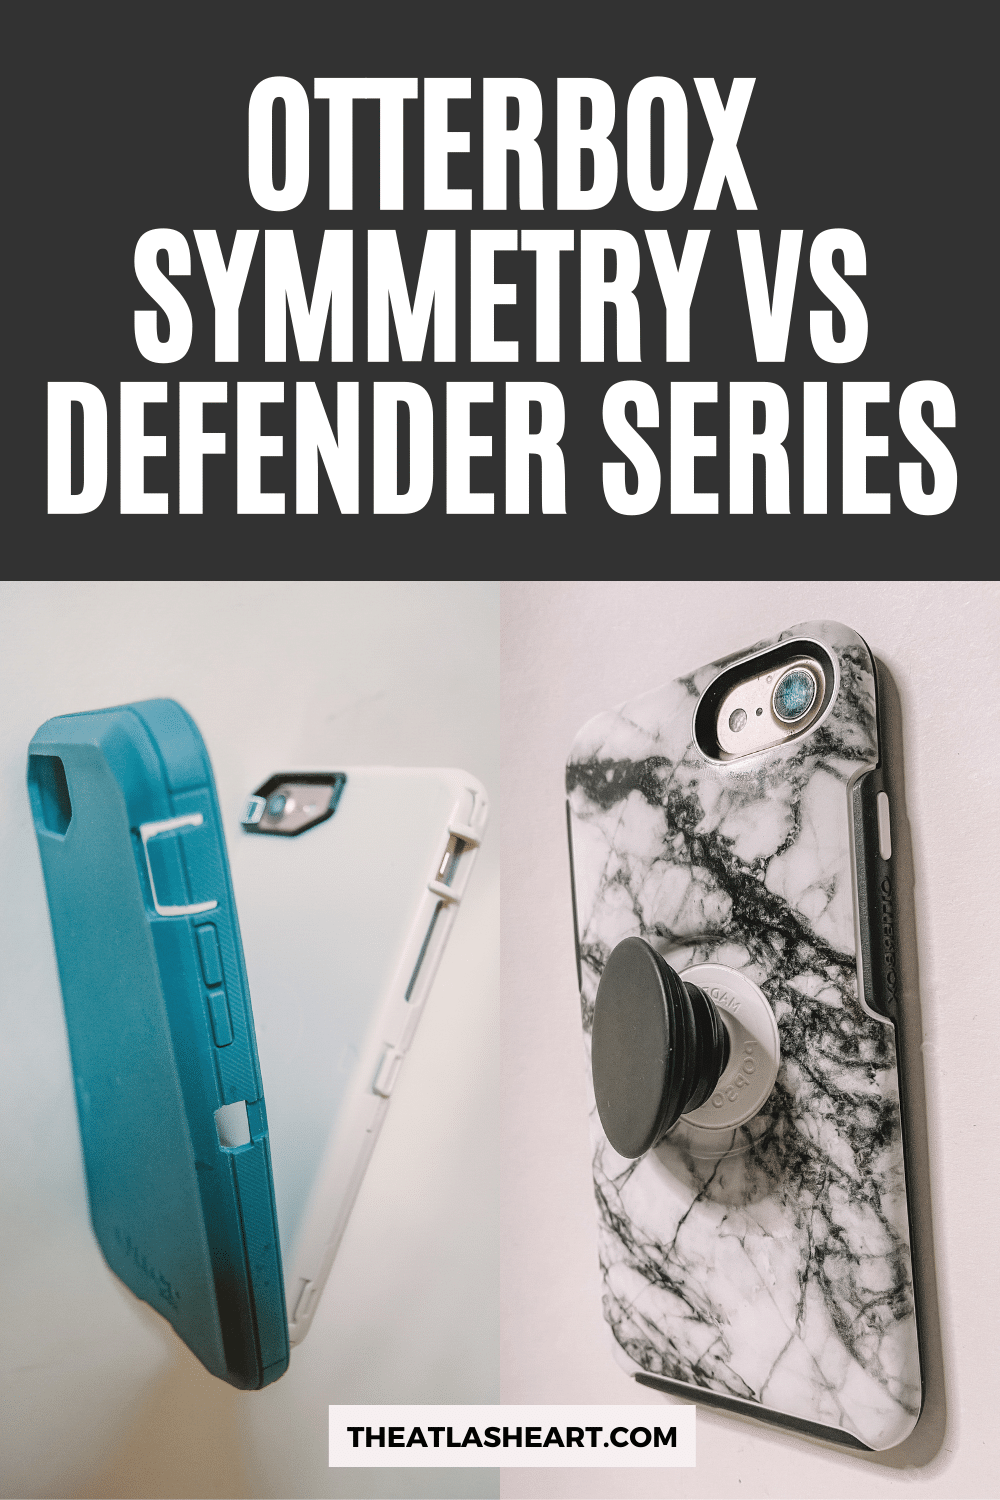 Otterbox Symmetry vs Defender Series: Which One is Better?